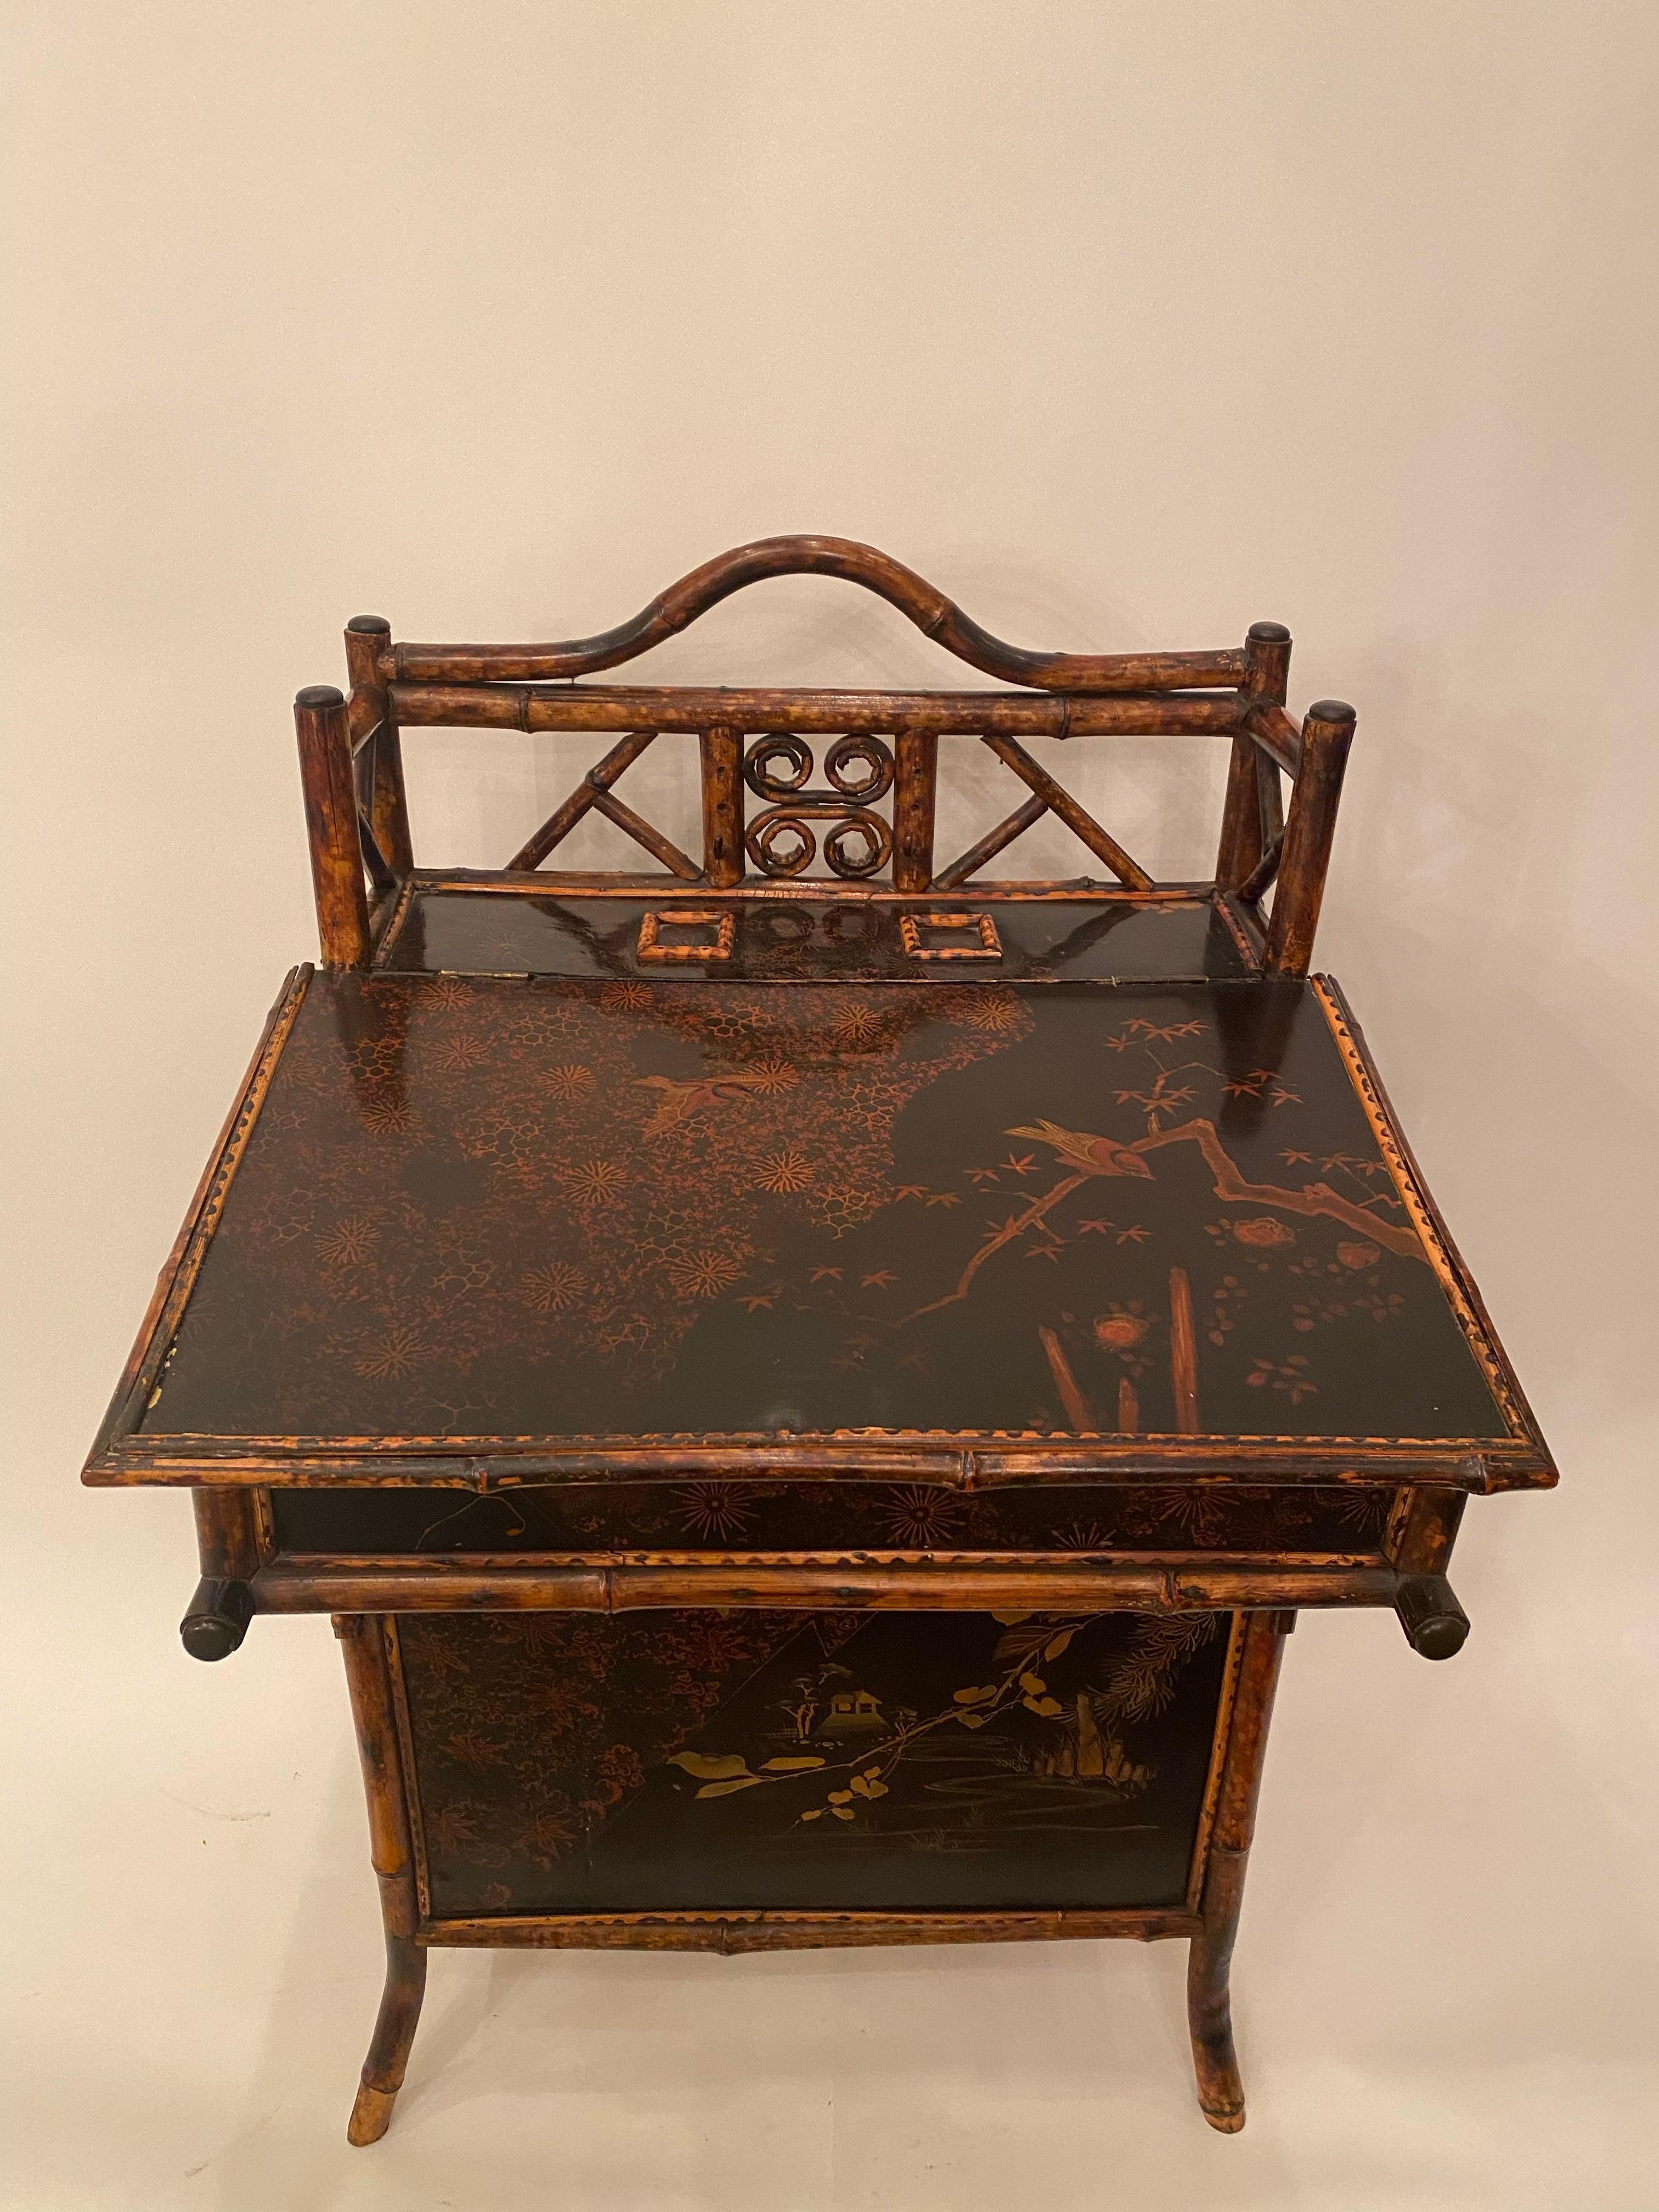 Late Meiji Period, circa 1900-1915, Japanese export lacquer and gilt Davenport desk, the entire finely decorated with the typical figural landscape and foliate gilt decoration, the sloped top opening to reveal a fitted interior with stationary